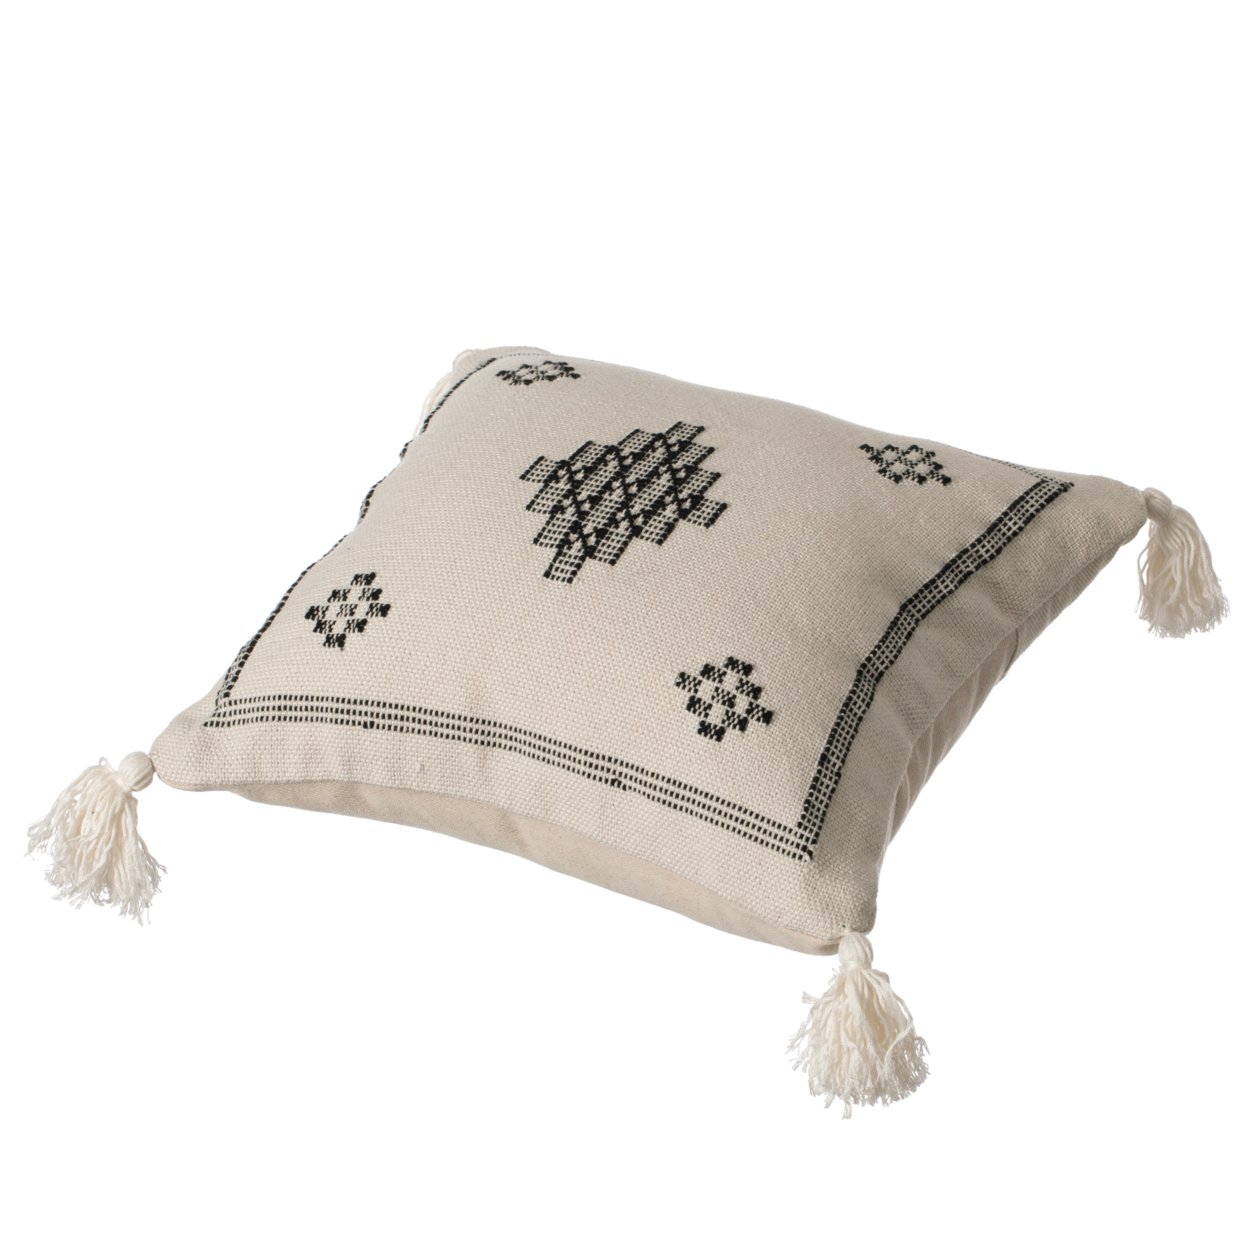 16 Throw Pillow Cover With Southwest Tribal Pattern And Corner Tassels - Grey With Cushion